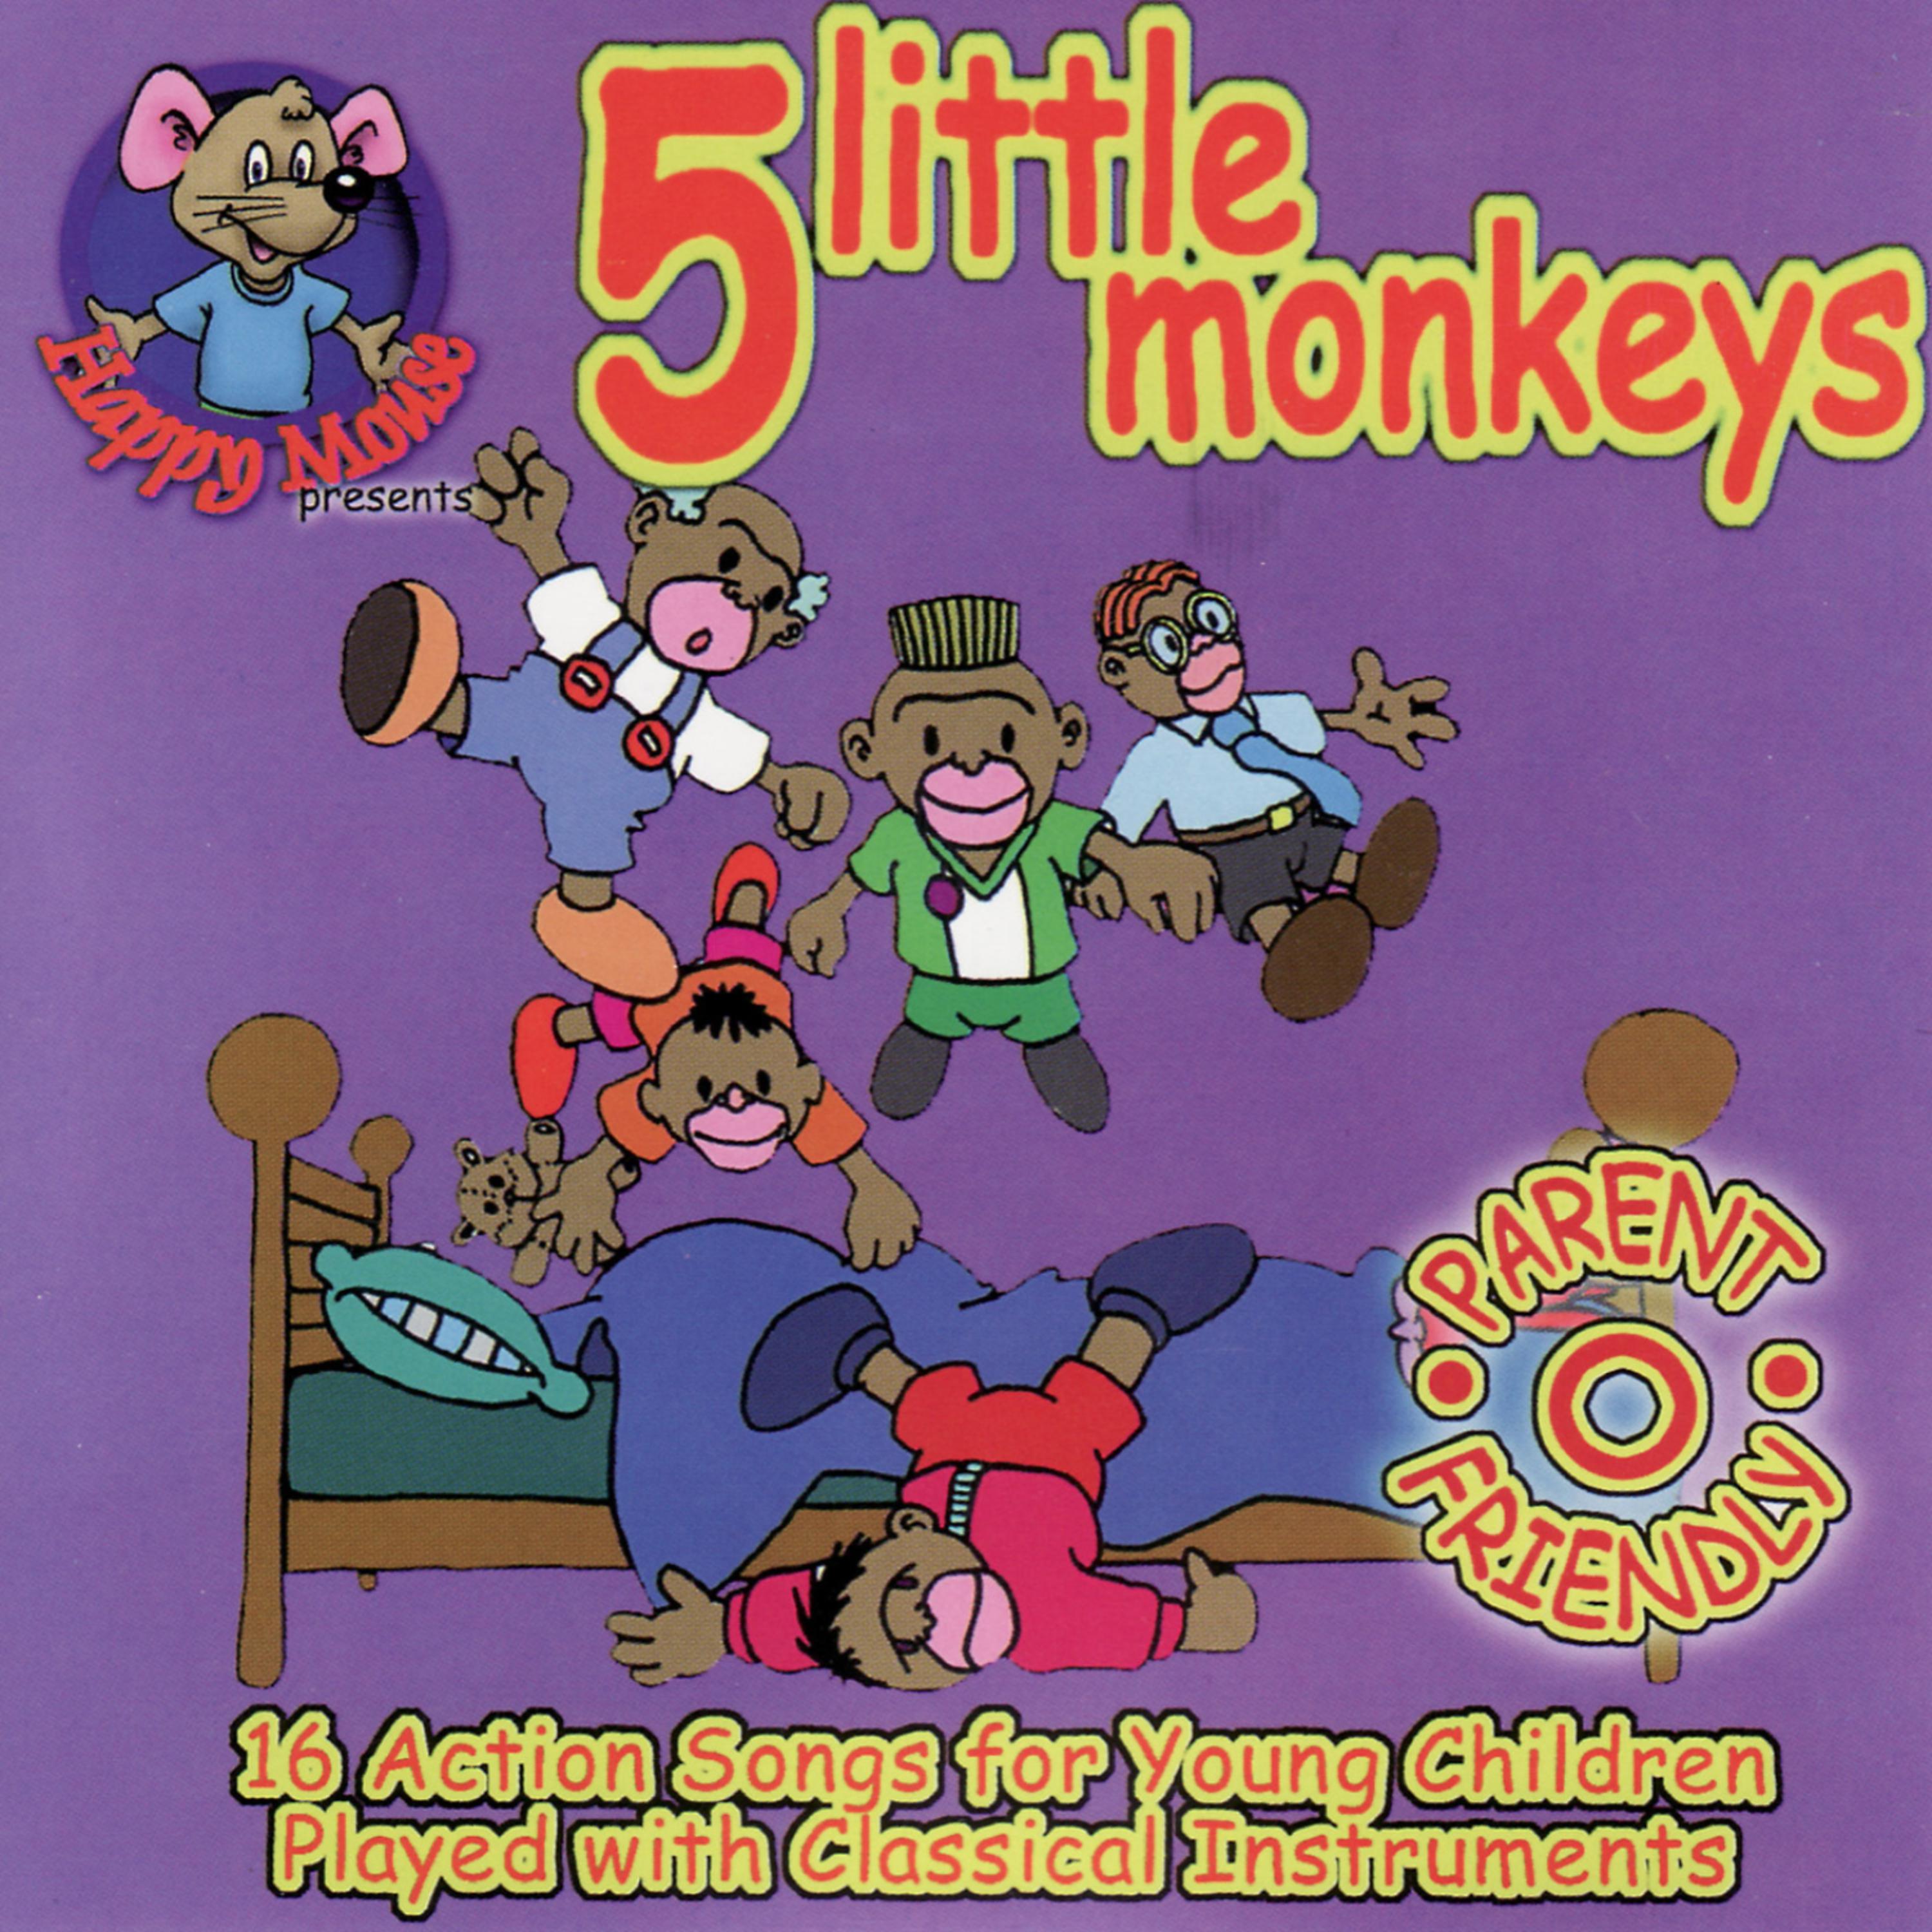 Постер альбома Happy Mouse Presents: 5 Little Monkeys 16 Action Songs for young children played with Classical instruments